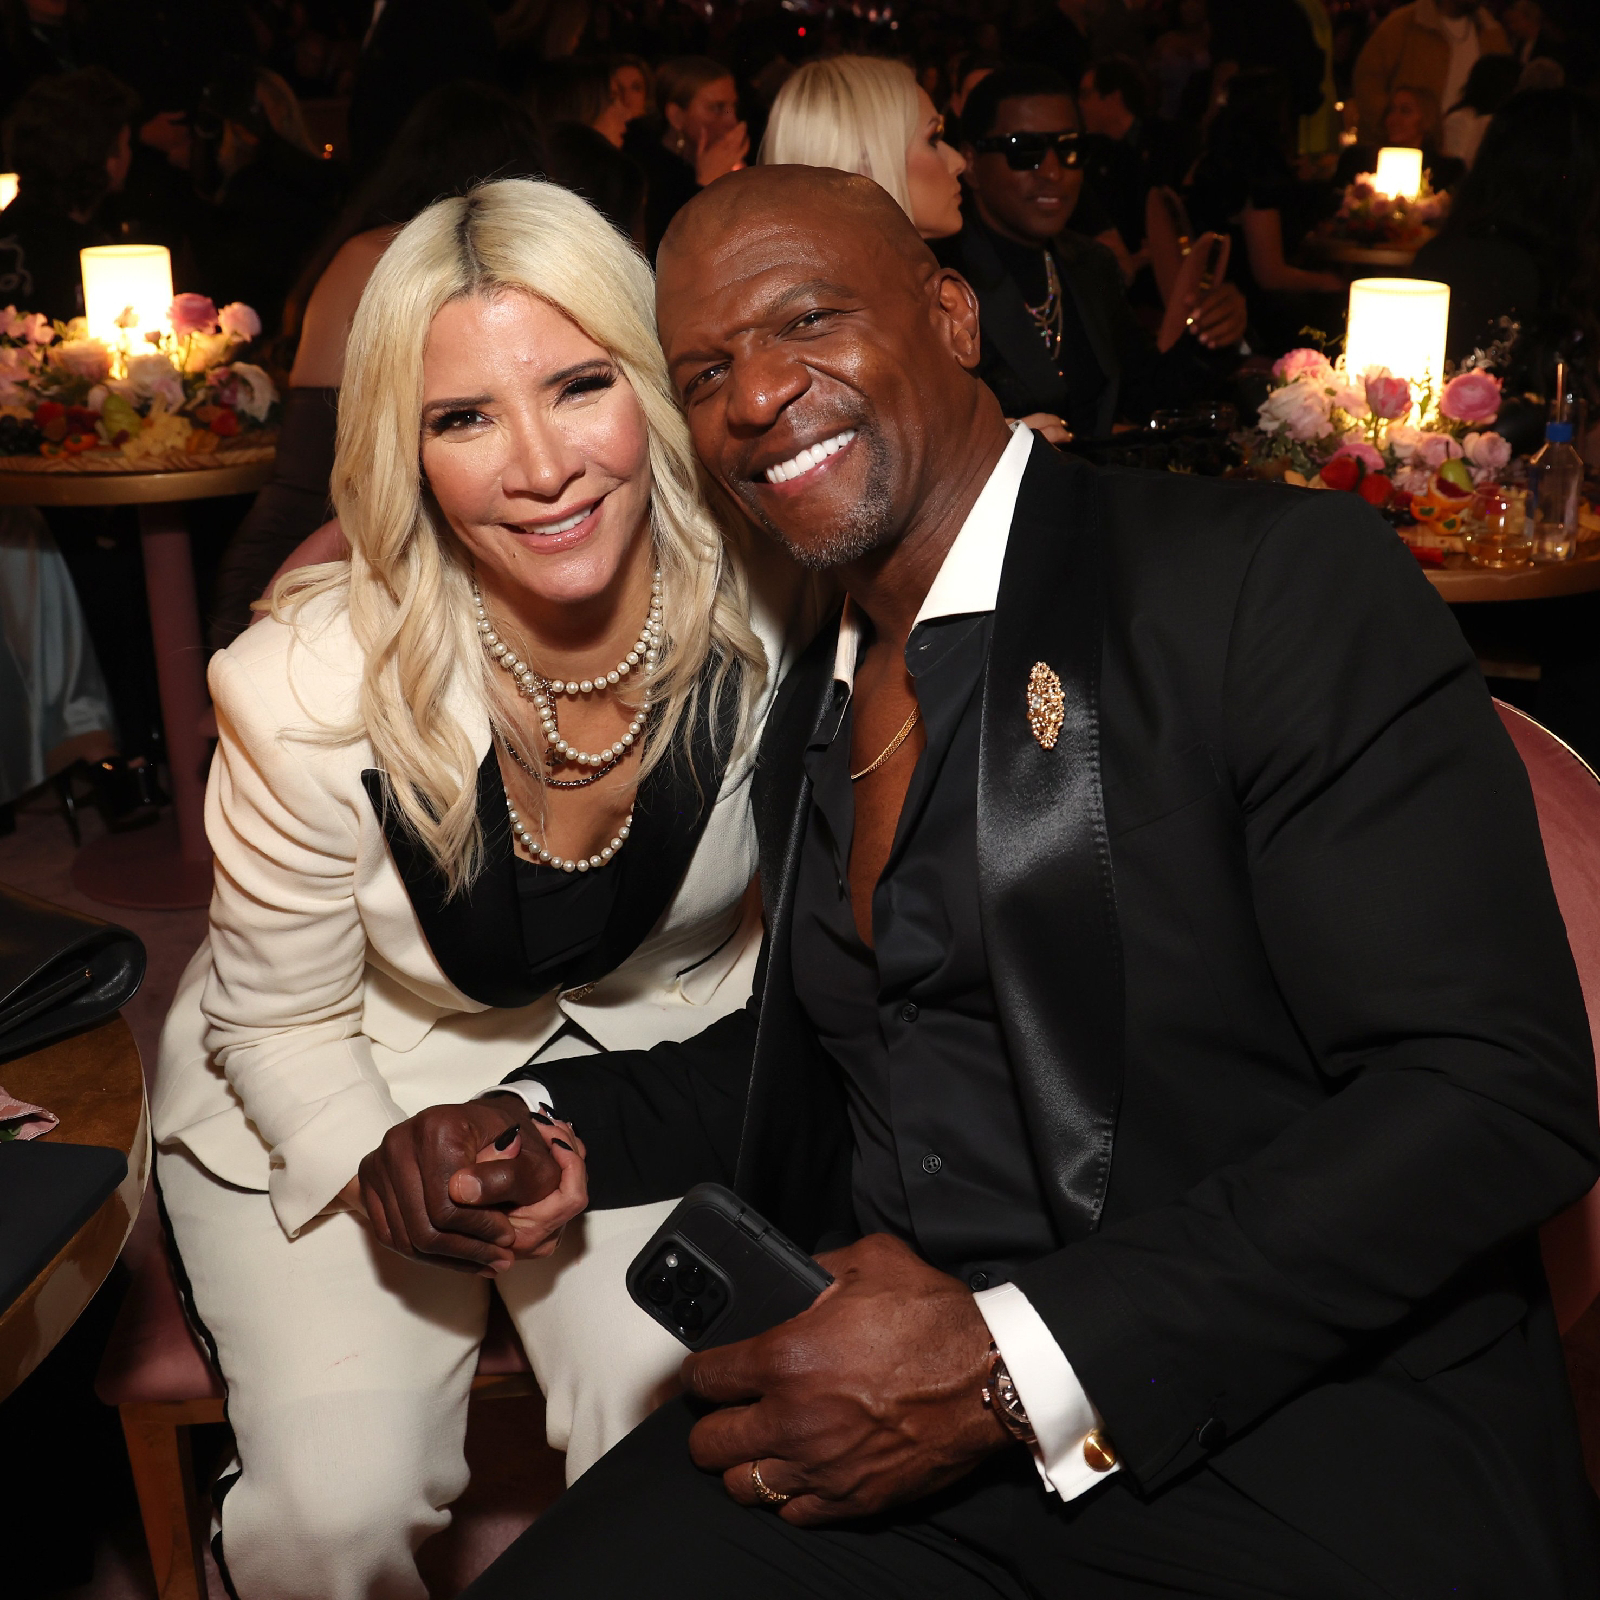 HOT Terry Crews wife was raised in the outskirts of